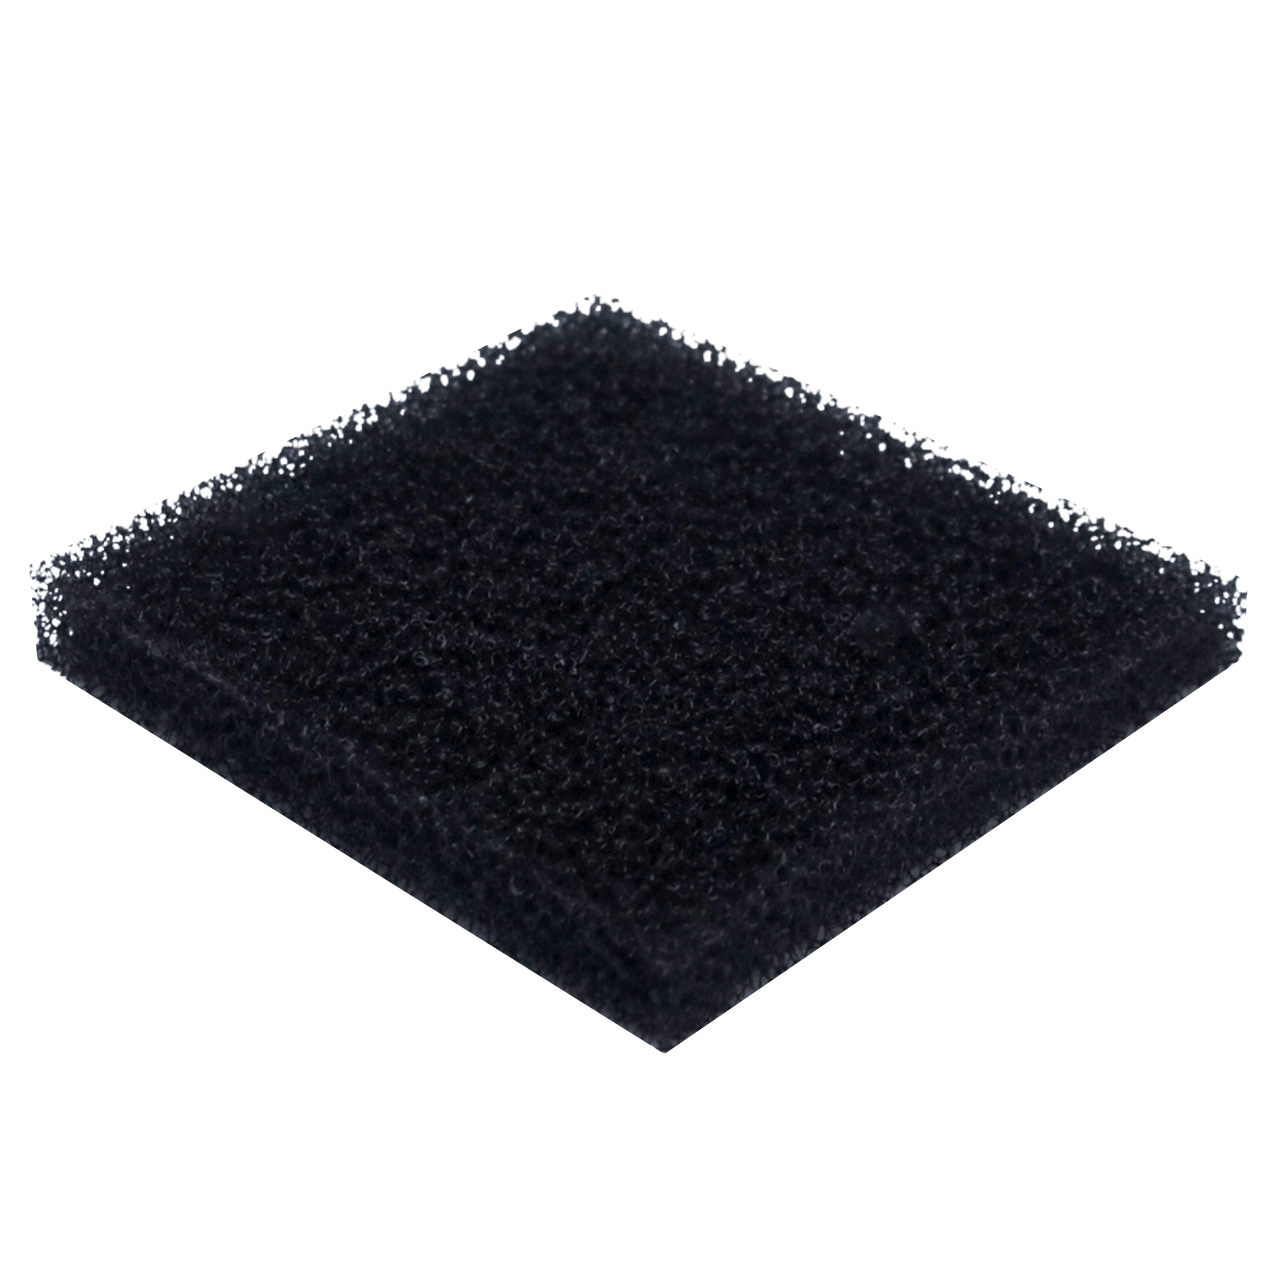 1/4" thick Acoustic Charcoal Foam